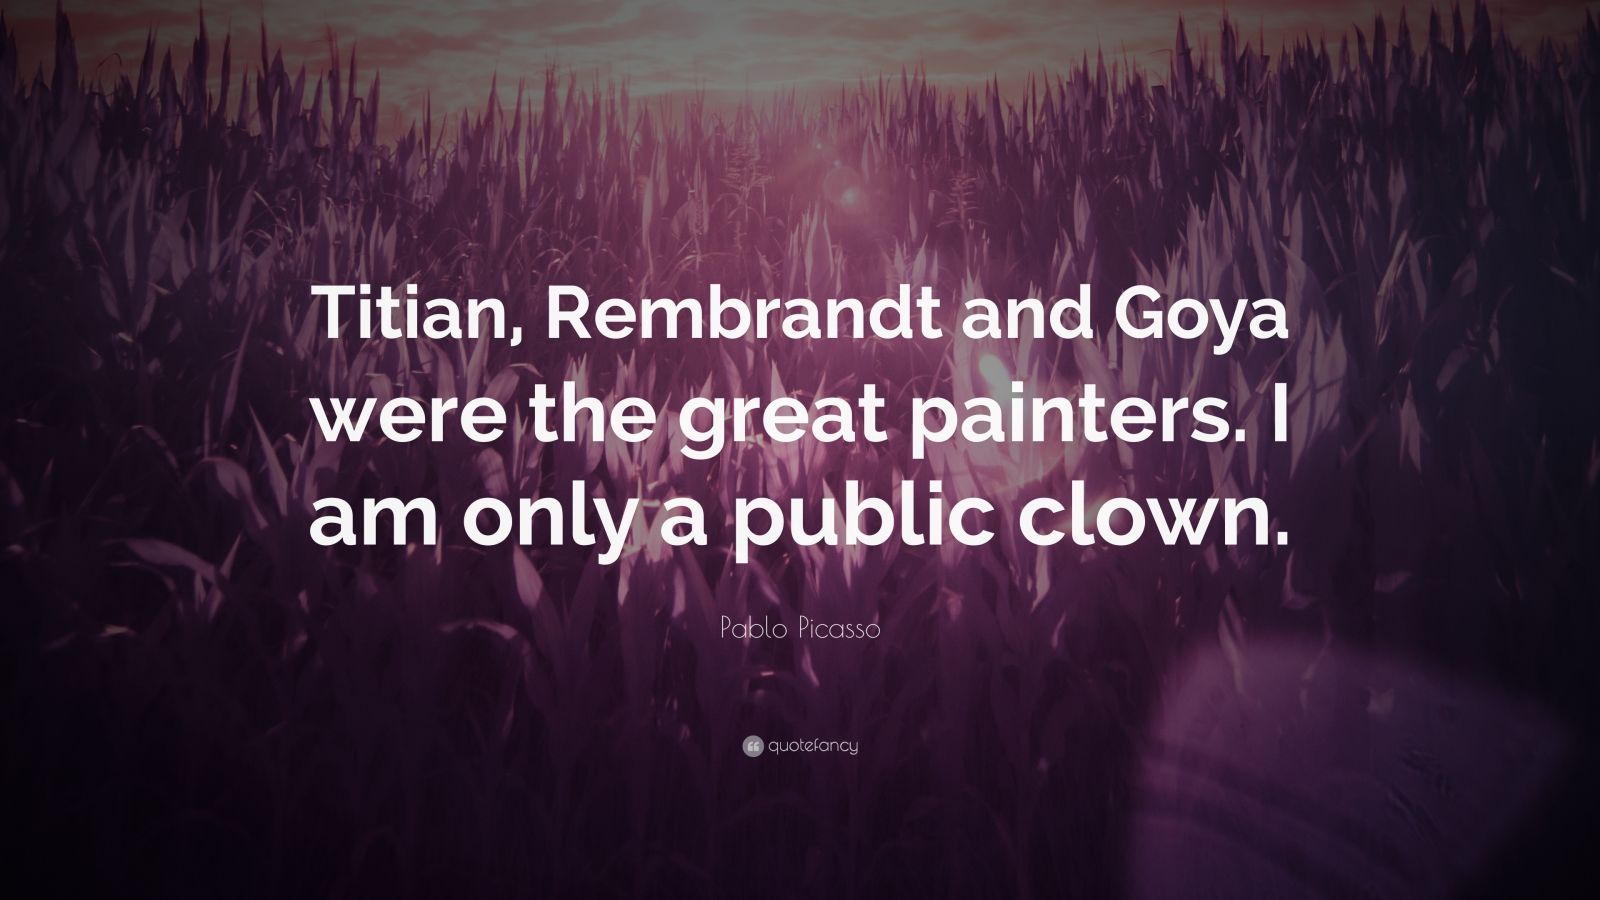 Pablo Picasso Quote: "Titian, Rembrandt and Goya were the great painters. I am only a public ...